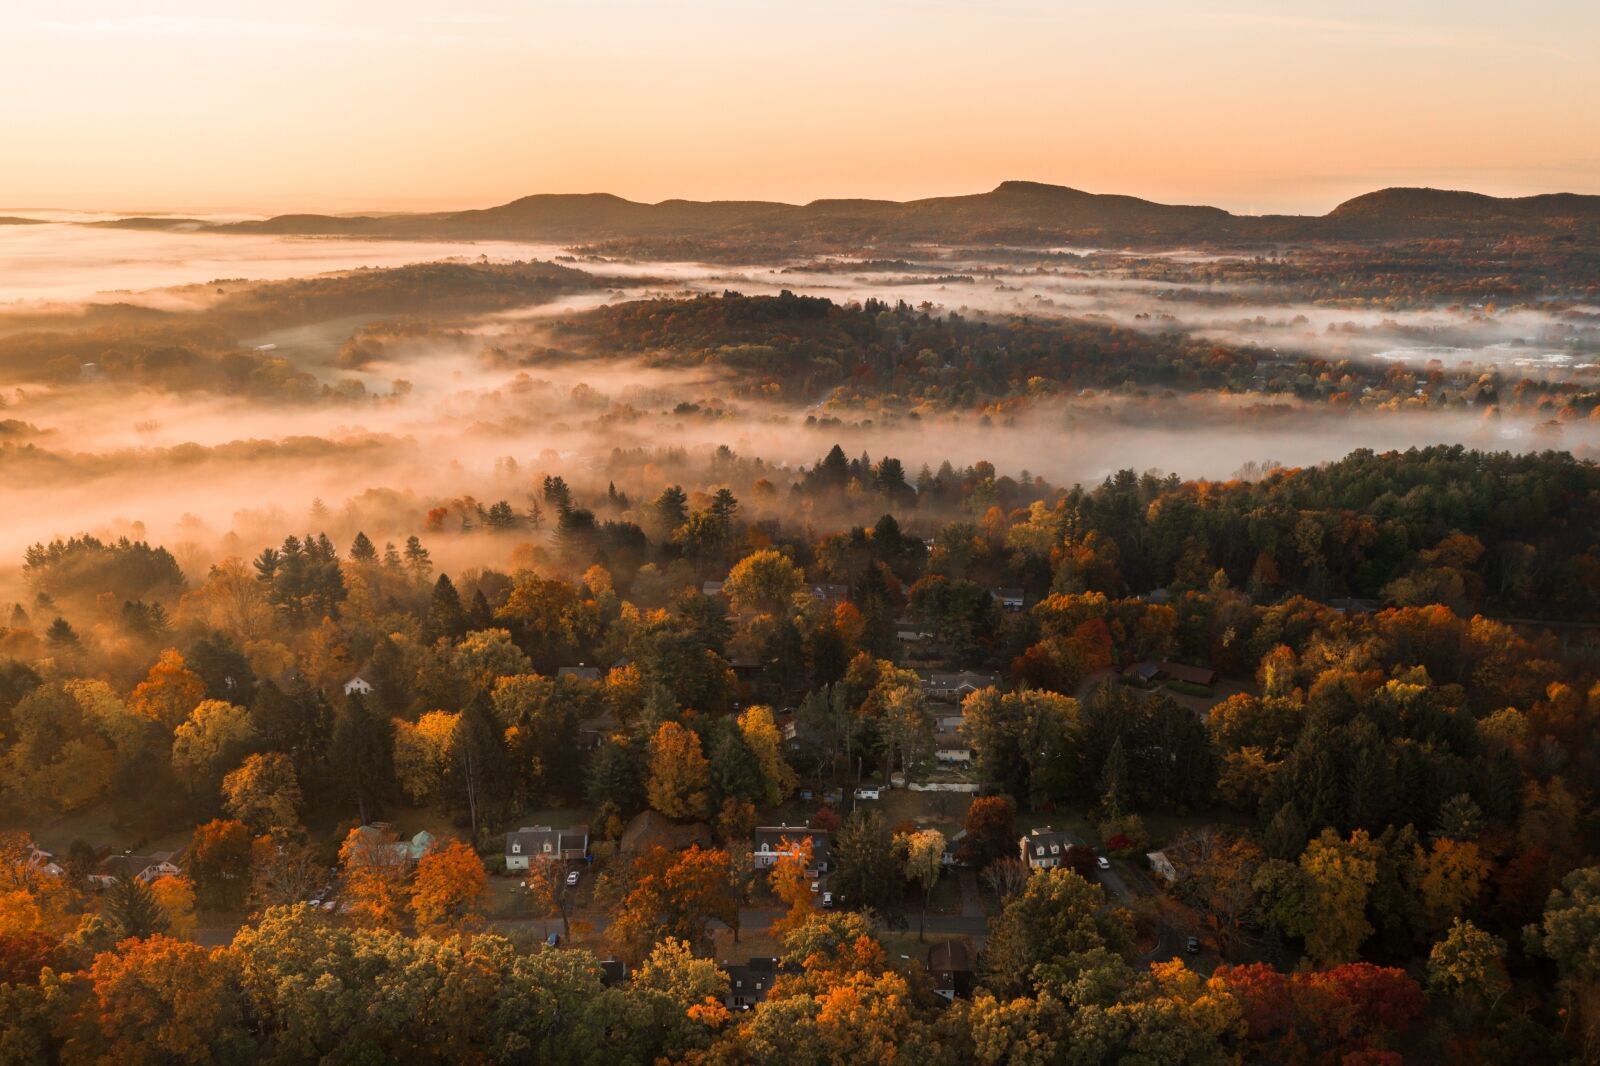 A beautiful view of the autumn trees in Pioneer Valley, Massachusetts, New England, USA